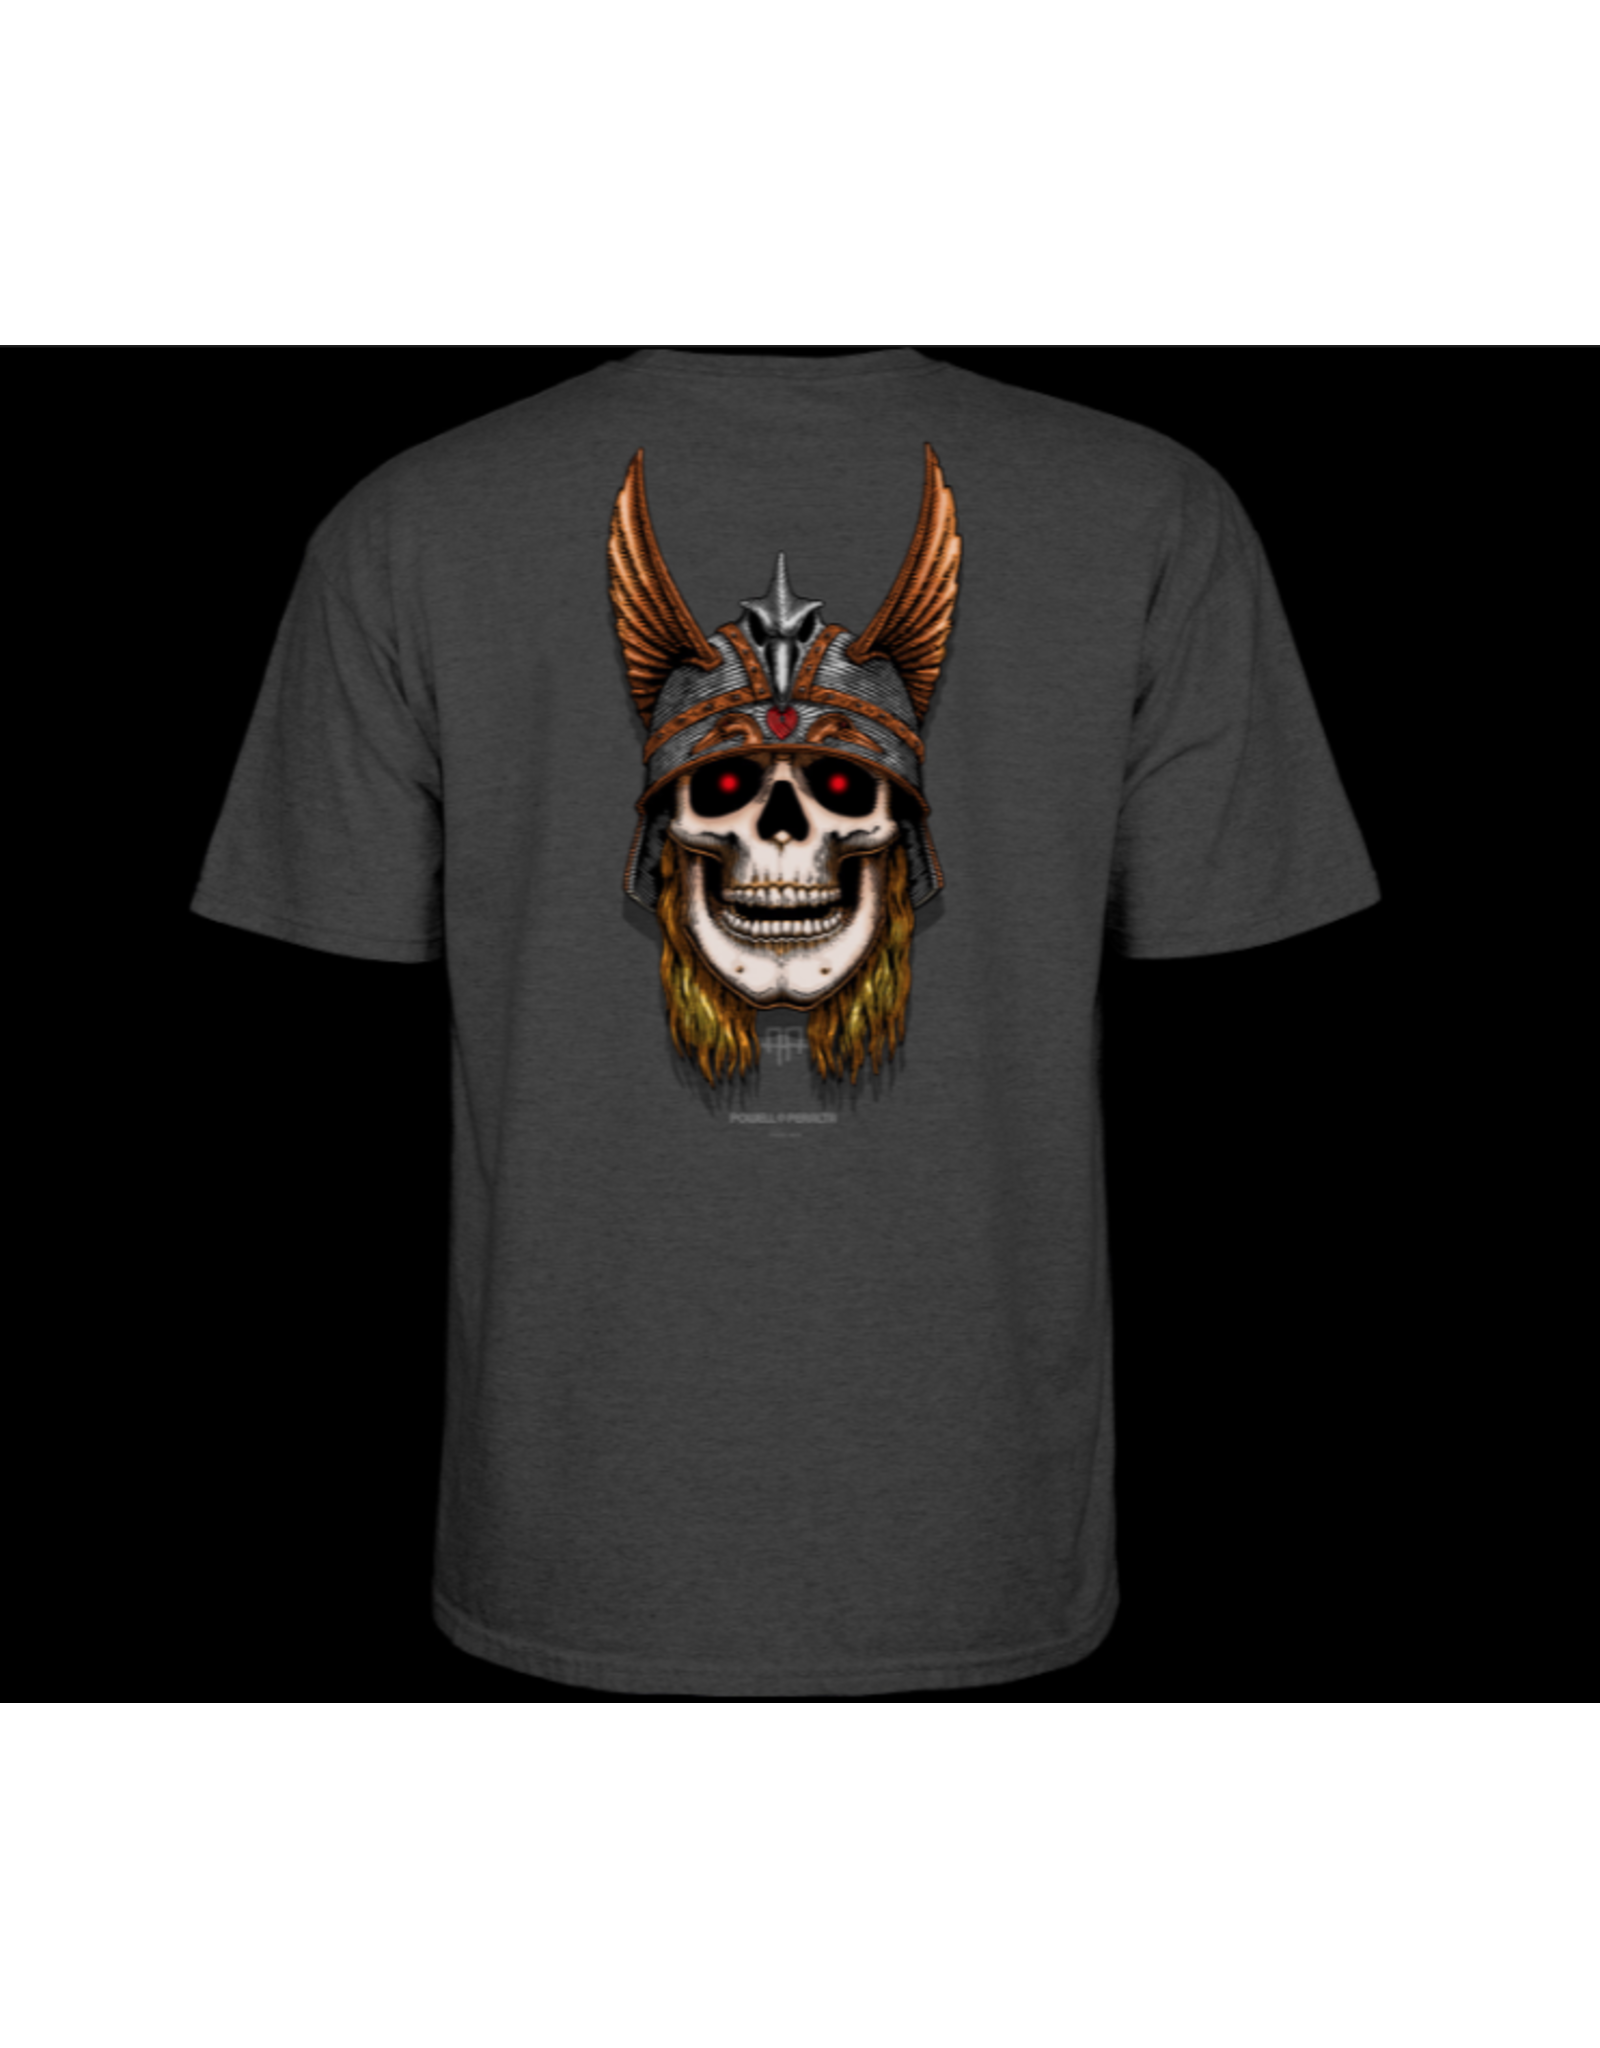 POWELL PERALTA POWELL PERALTA ANDY ANDERSON SKULL CHARCOAL HEATHER T-SHIRT